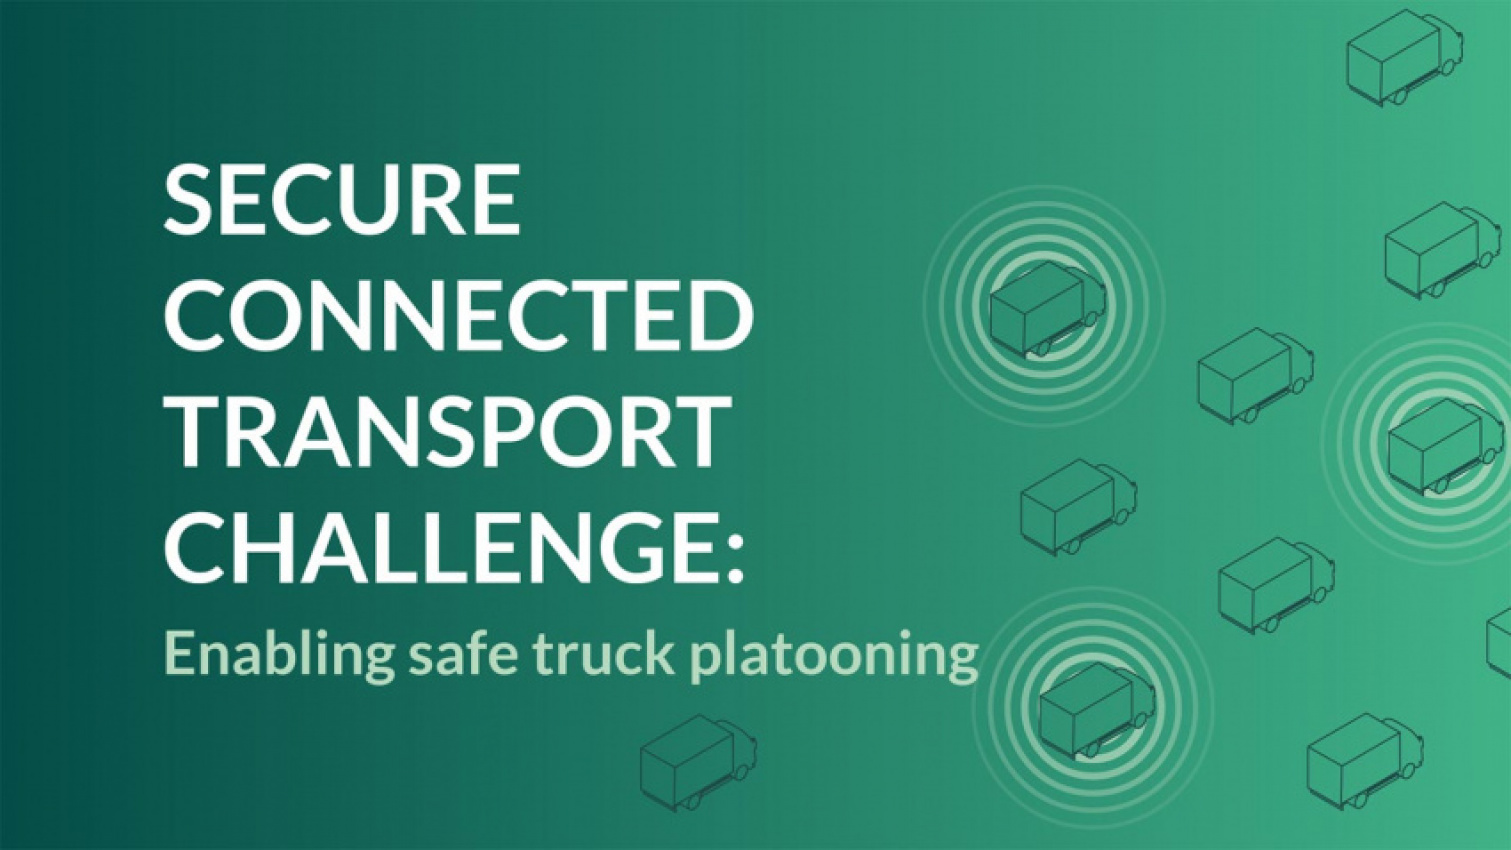 autos, cars, commercial vehicles, technology, ccav, plexal, british government funds project to enable lorry platooning